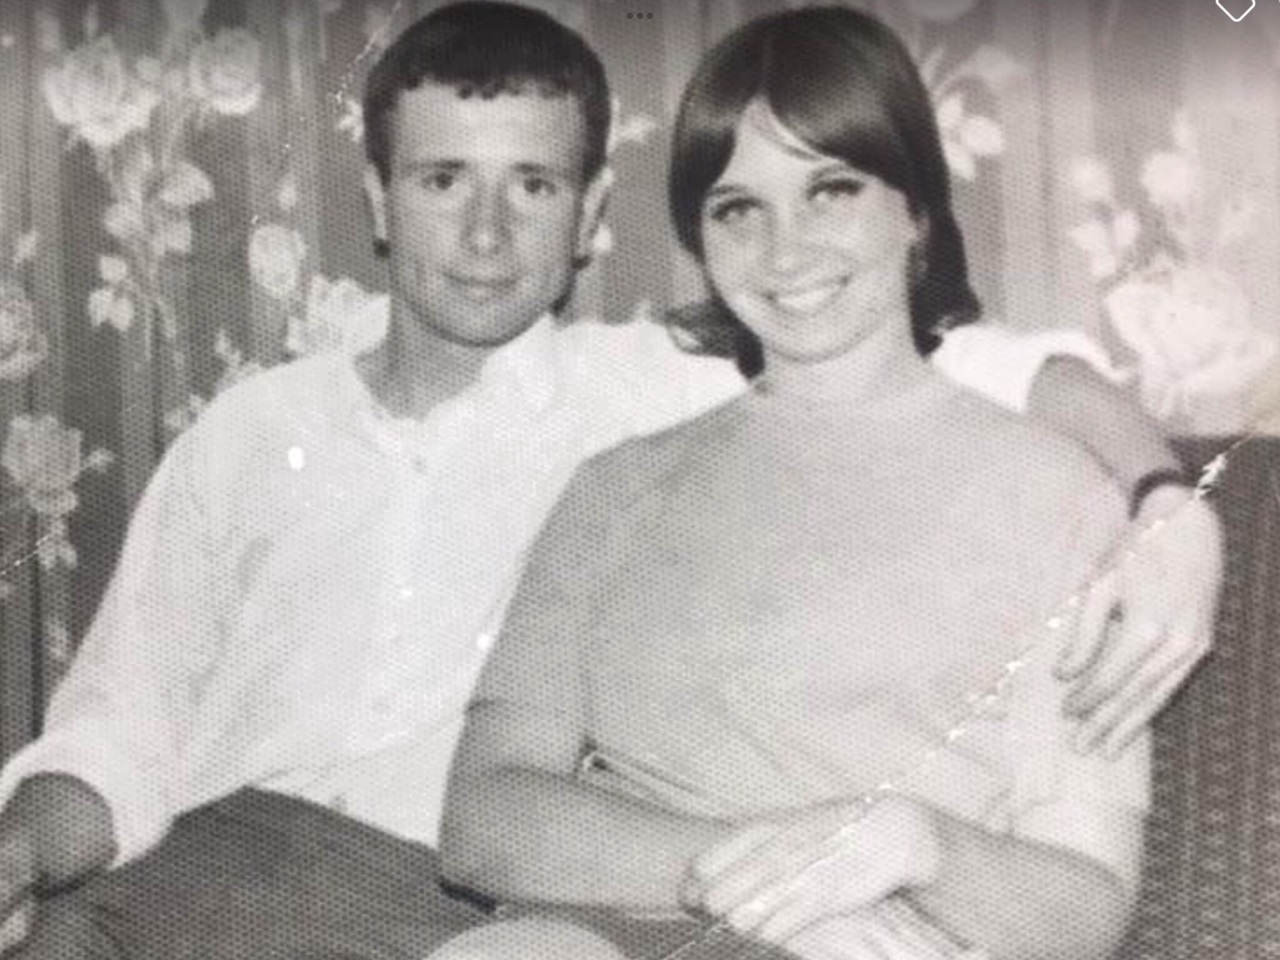 George and Sue in 1974, the year they first fostered, when Sue was 23 and George was 28